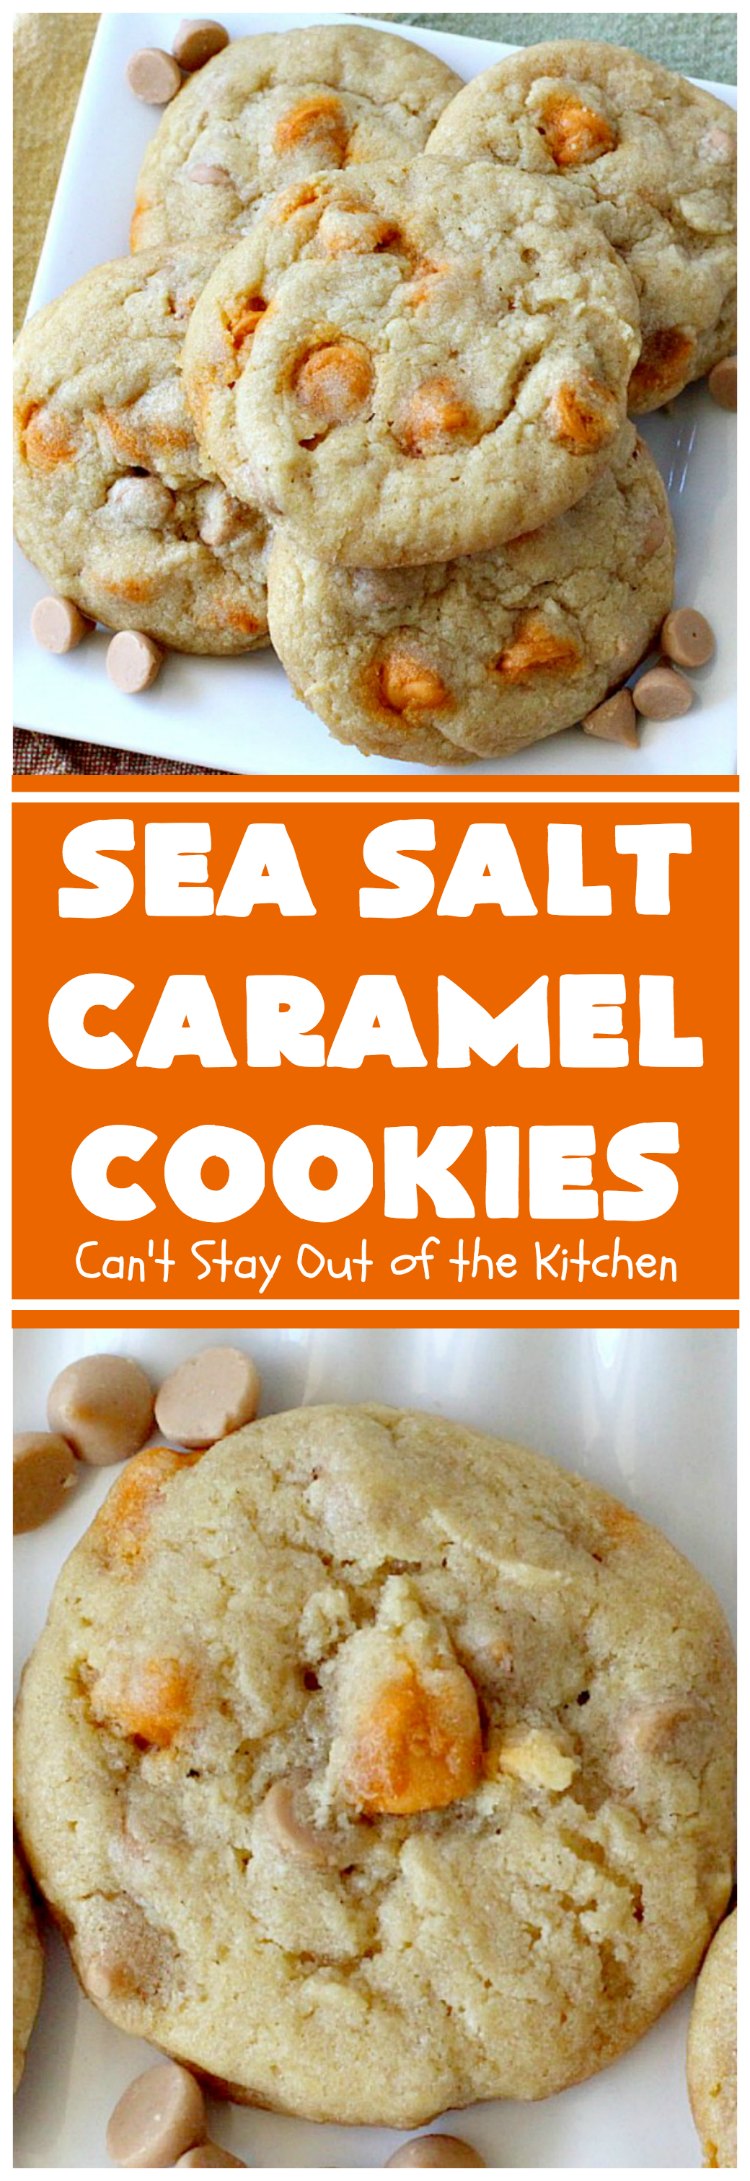 Sea Salt Caramel Cookies | Can't Stay Out of the KitchenSea Salt Caramel Cookies | Can't Stay Out of the Kitchen